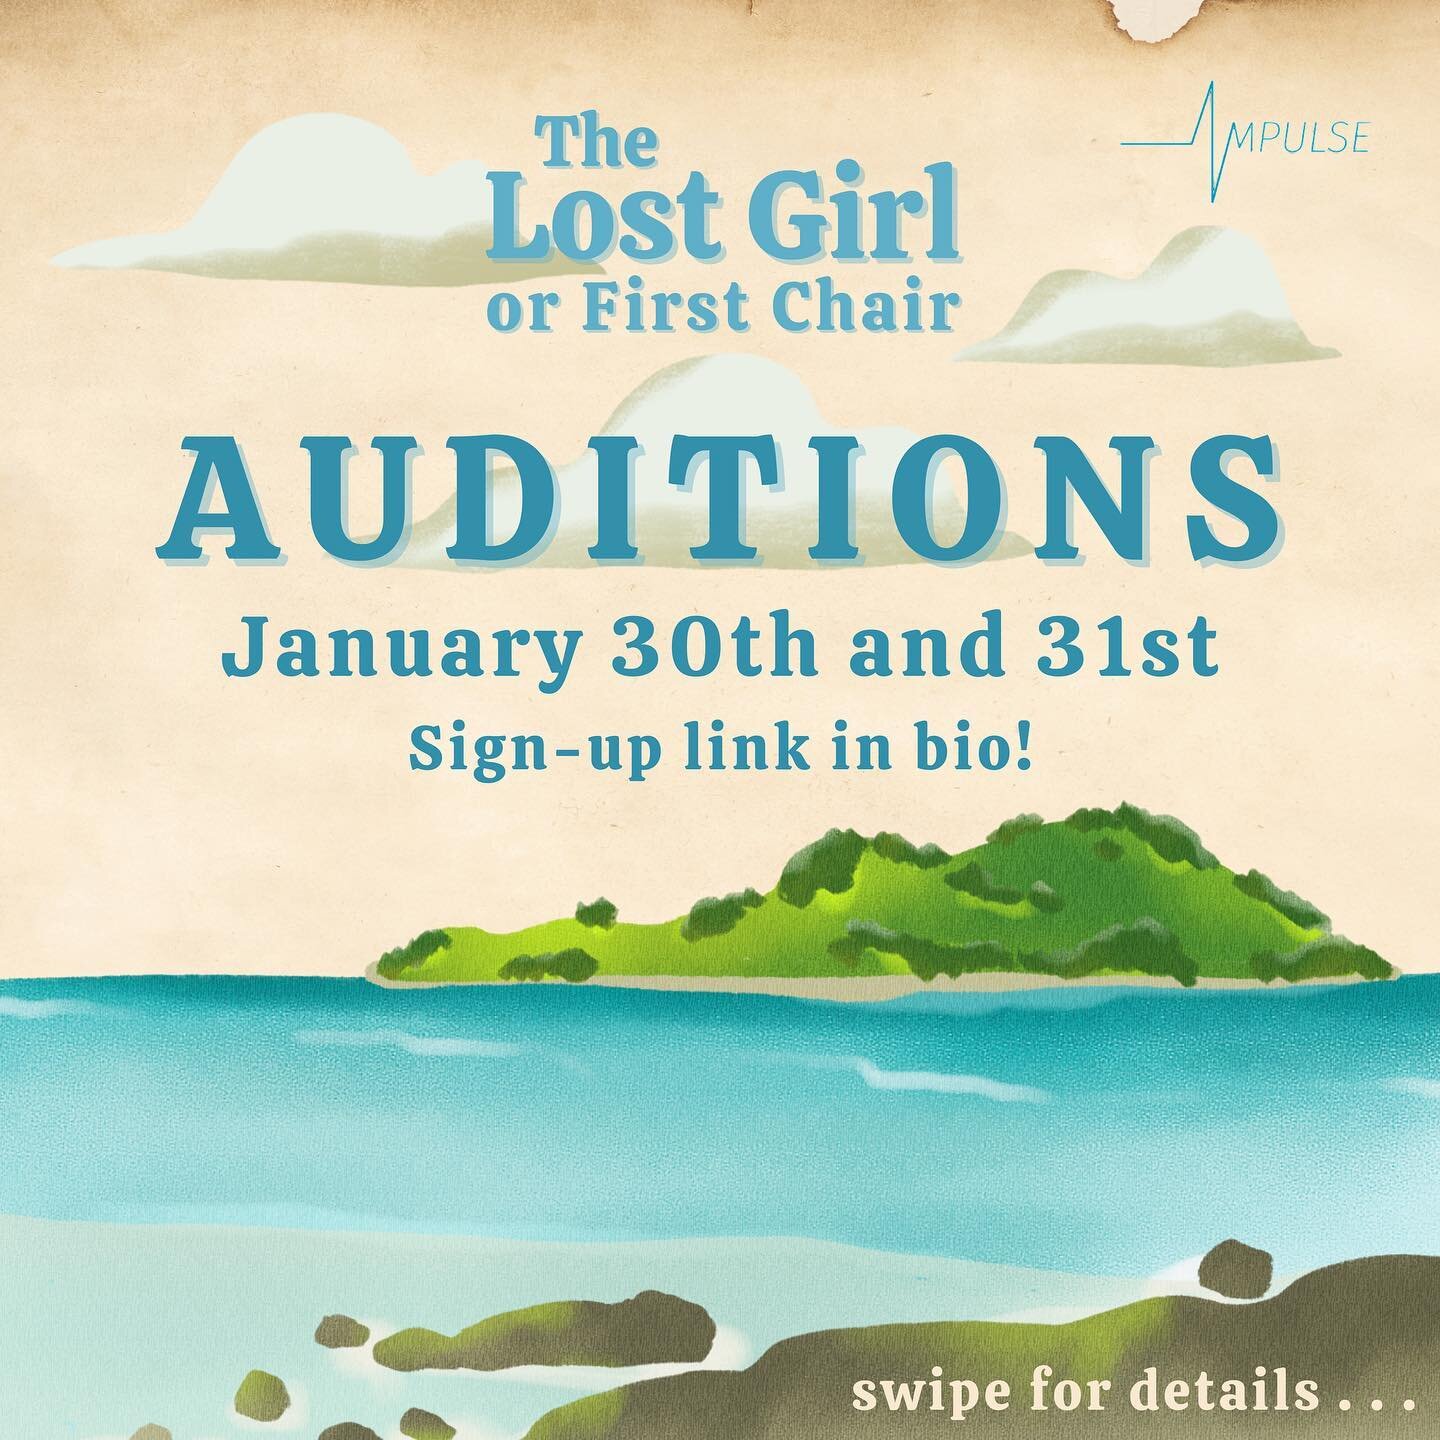 We are thrilled to announce auditions for our Spring One-Act, The Lost Girl, or First Chair! Please visit our bio to sign up for auditions and submit your audition form. Email uscimpulse@gmail.com with any questions. We can&rsquo;t wait to see you th